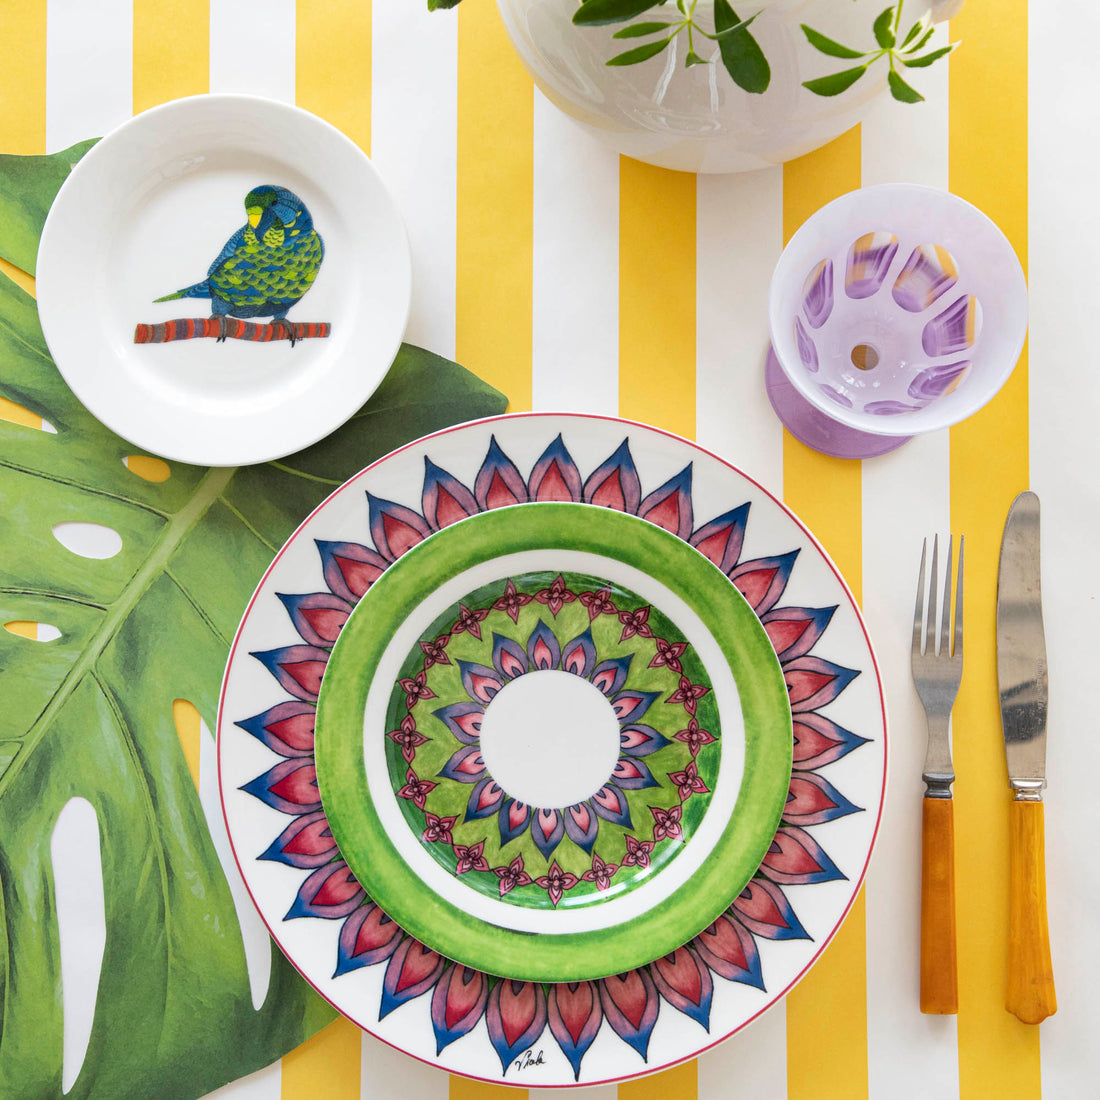 A plate with a bird on it from the Park Hill Calypso Dinnerware collection.